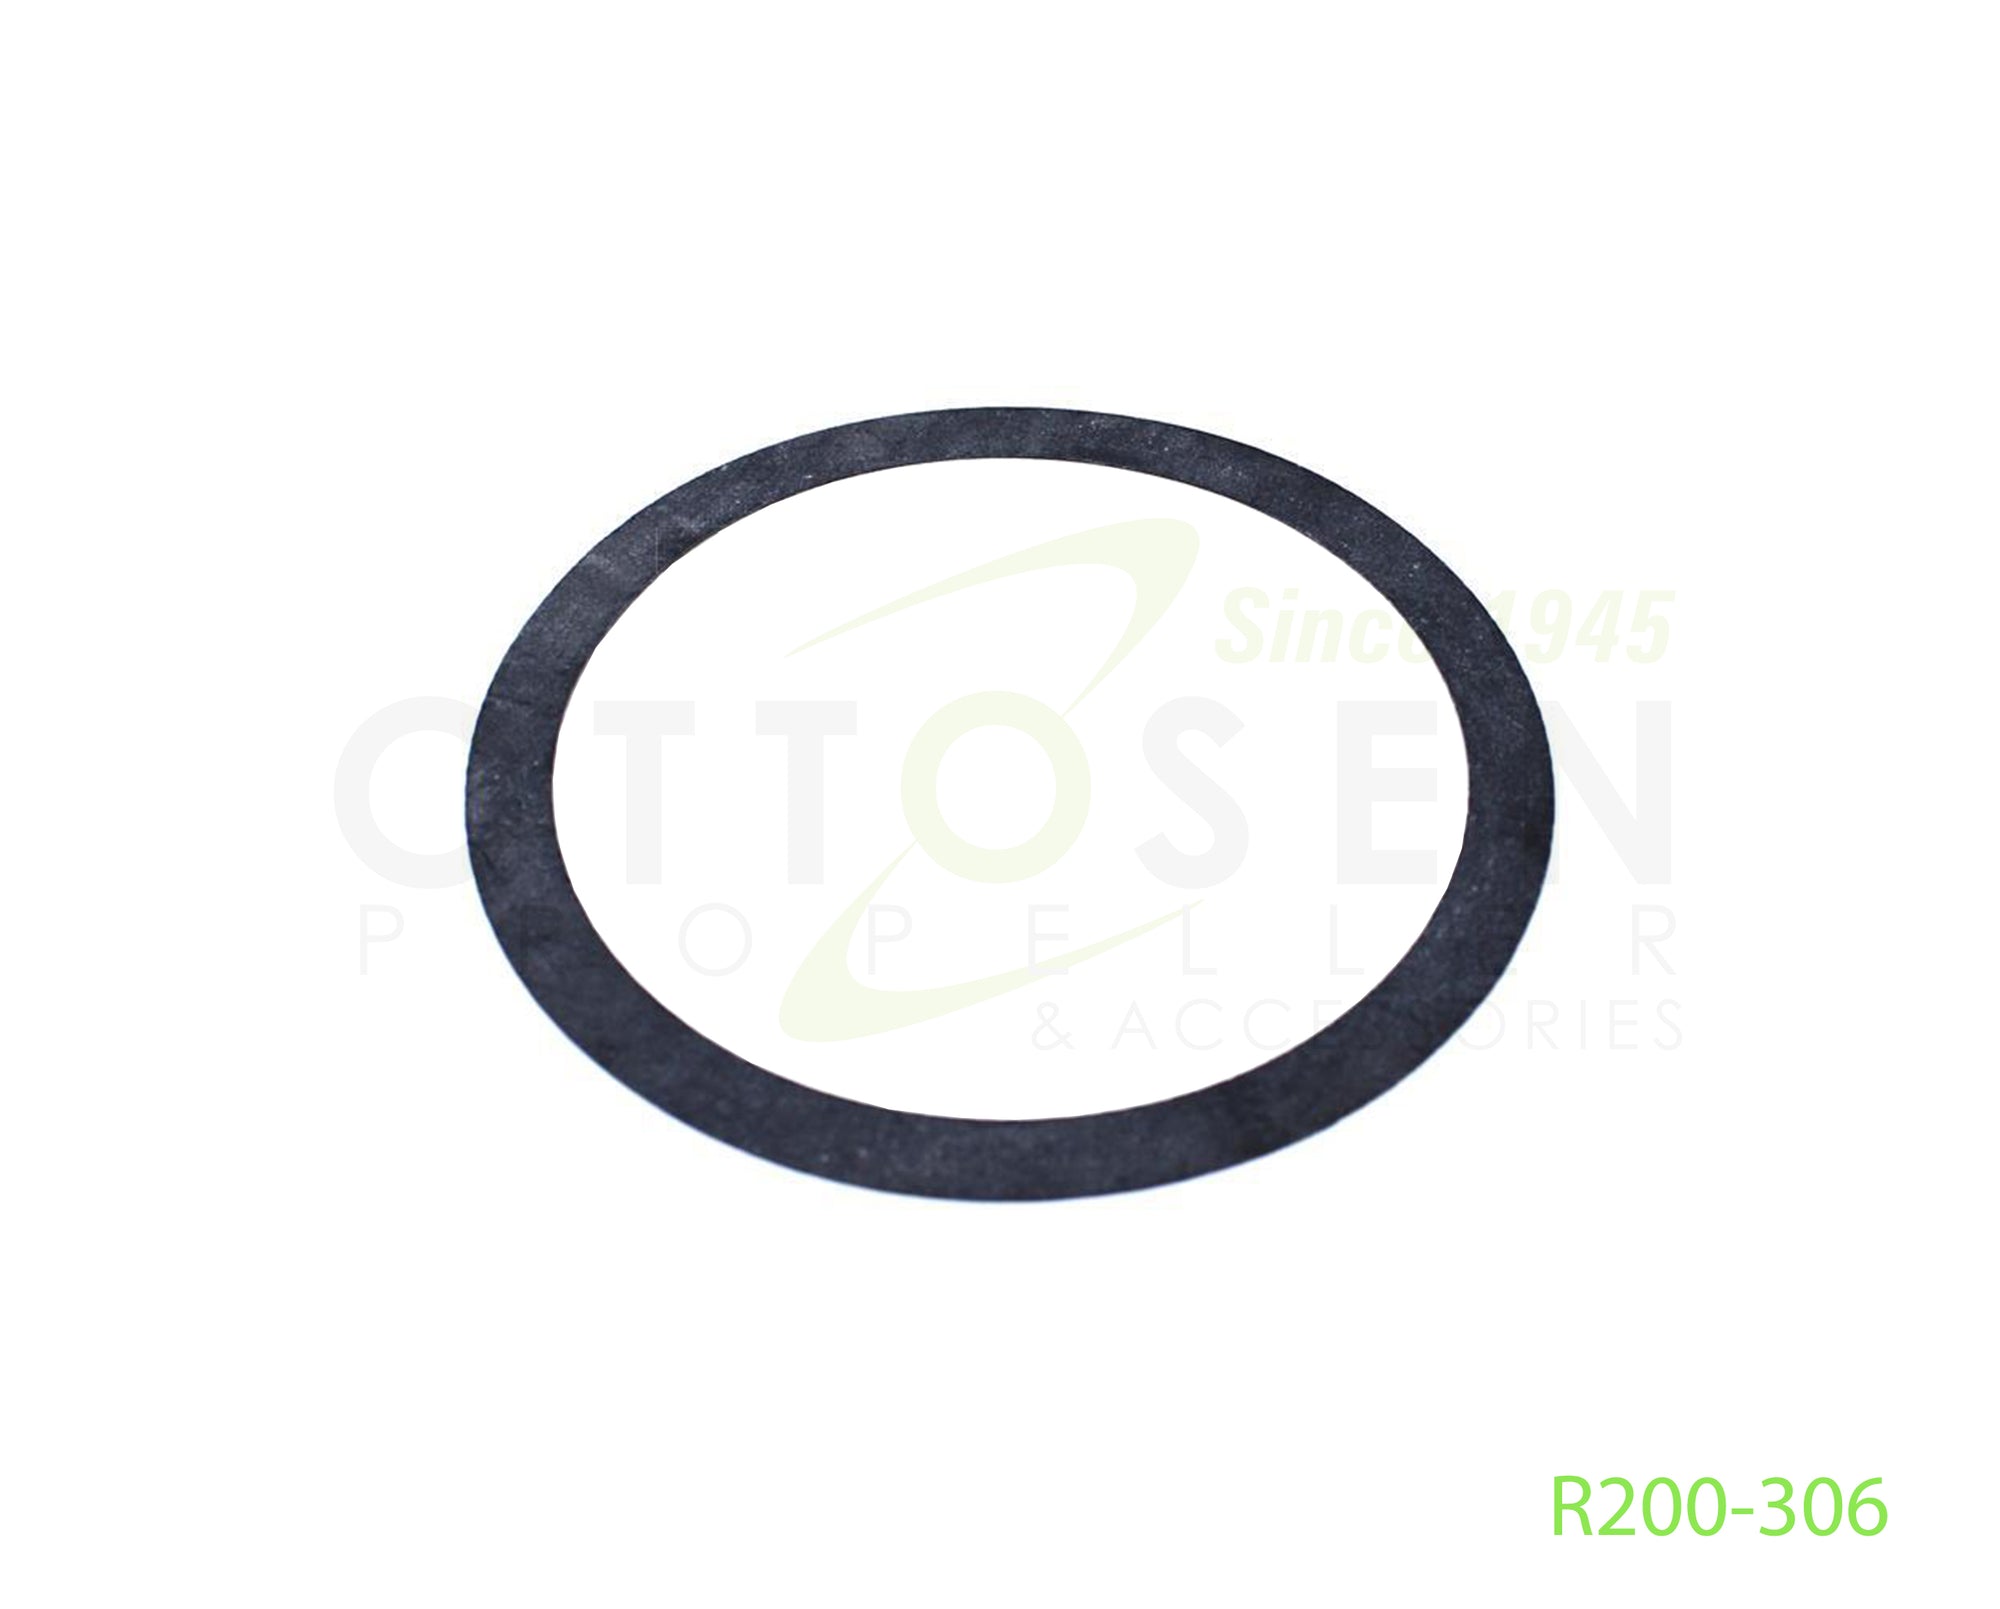 R200-306-BEECHCRAFT-PITCH-CONTROL-BEARING-SEAL-PICTURE-1